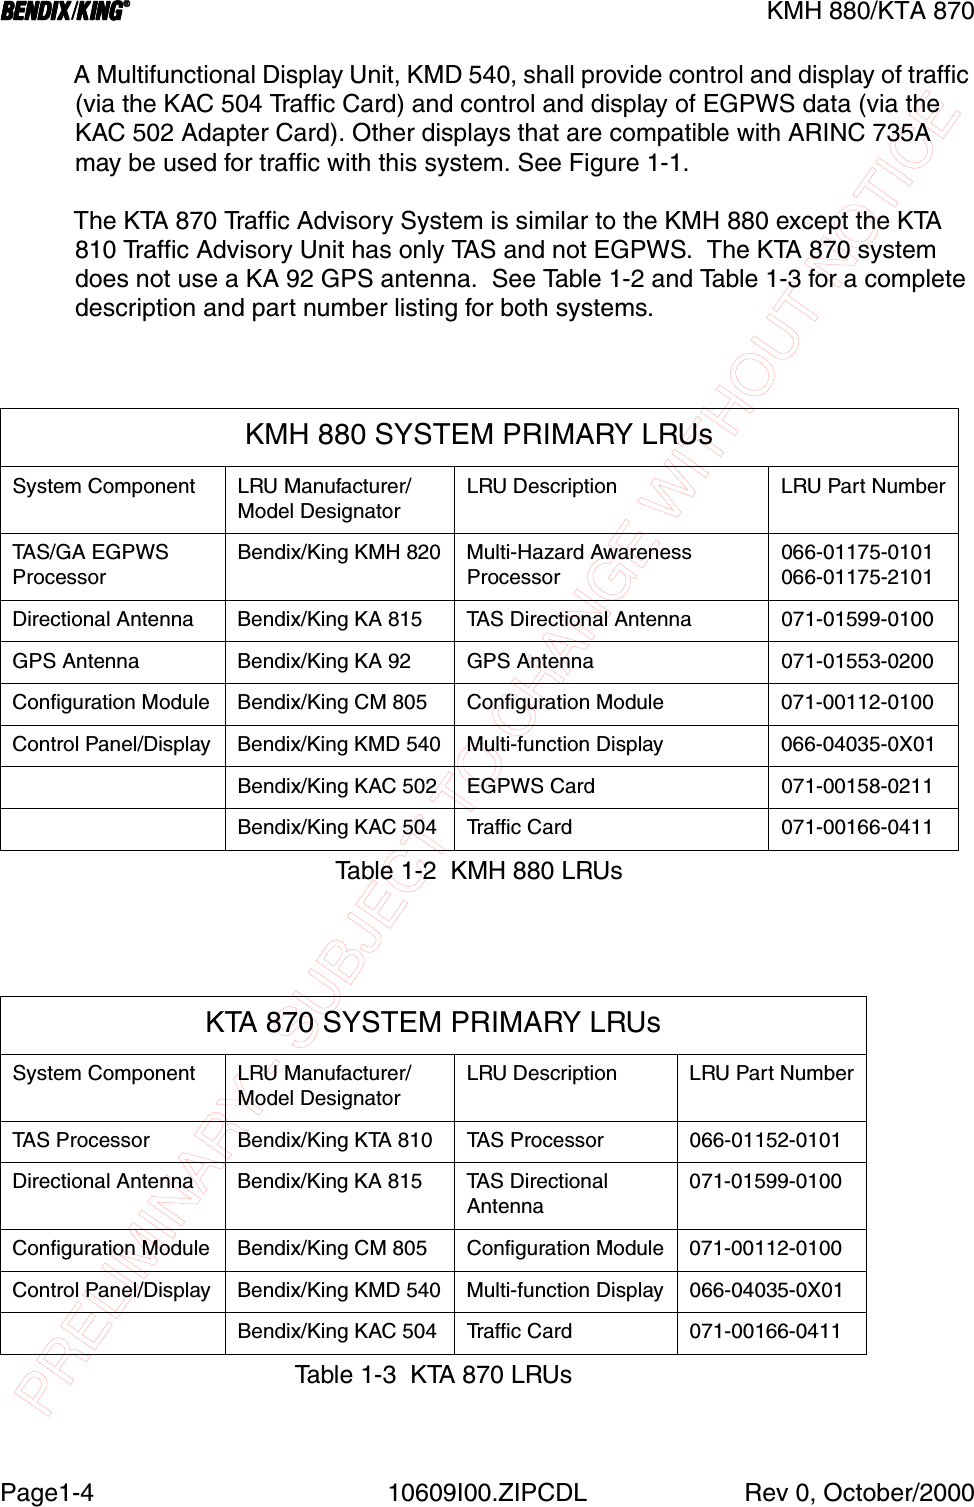 PRELIMINARY - SUBJECT TO CHANGE WITHOUT NOTICEBBBBKMH 880/KTA 870Page1-4 10609I00.ZIPCDL Rev 0, October/2000A Multifunctional Display Unit, KMD 540, shall provide control and display of traffic (via the KAC 504 Traffic Card) and control and display of EGPWS data (via the KAC 502 Adapter Card). Other displays that are compatible with ARINC 735A may be used for traffic with this system. See Figure 1-1. The KTA 870 Traffic Advisory System is similar to the KMH 880 except the KTA 810 Traffic Advisory Unit has only TAS and not EGPWS.  The KTA 870 system does not use a KA 92 GPS antenna.  See Table 1-2 and Table 1-3 for a complete description and part number listing for both systems.KMH 880 SYSTEM PRIMARY LRUsSystem Component LRU Manufacturer/Model DesignatorLRU Description LRU Part NumberTA S / G A  E G P W SProcessorBendix/King KMH 820 Multi-Hazard Awareness Processor066-01175-0101066-01175-2101Directional Antenna Bendix/King KA 815 TAS Directional Antenna 071-01599-0100GPS Antenna Bendix/King KA 92 GPS Antenna 071-01553-0200Configuration Module Bendix/King CM 805 Configuration Module 071-00112-0100Control Panel/Display Bendix/King KMD 540 Multi-function Display 066-04035-0X01Bendix/King KAC 502 EGPWS Card 071-00158-0211Bendix/King KAC 504 Traffic Card 071-00166-0411Table 1-2  KMH 880 LRUsKTA 870 SYSTEM PRIMARY LRUsSystem Component LRU Manufacturer/Model DesignatorLRU Description LRU Part NumberTAS Processor Bendix/King KTA 810 TAS Processor 066-01152-0101Directional Antenna Bendix/King KA 815 TAS DirectionalAntenna071-01599-0100Configuration Module Bendix/King CM 805 Configuration Module 071-00112-0100Control Panel/Display Bendix/King KMD 540 Multi-function Display 066-04035-0X01Bendix/King KAC 504 Traffic Card 071-00166-0411Table 1-3  KTA 870 LRUs